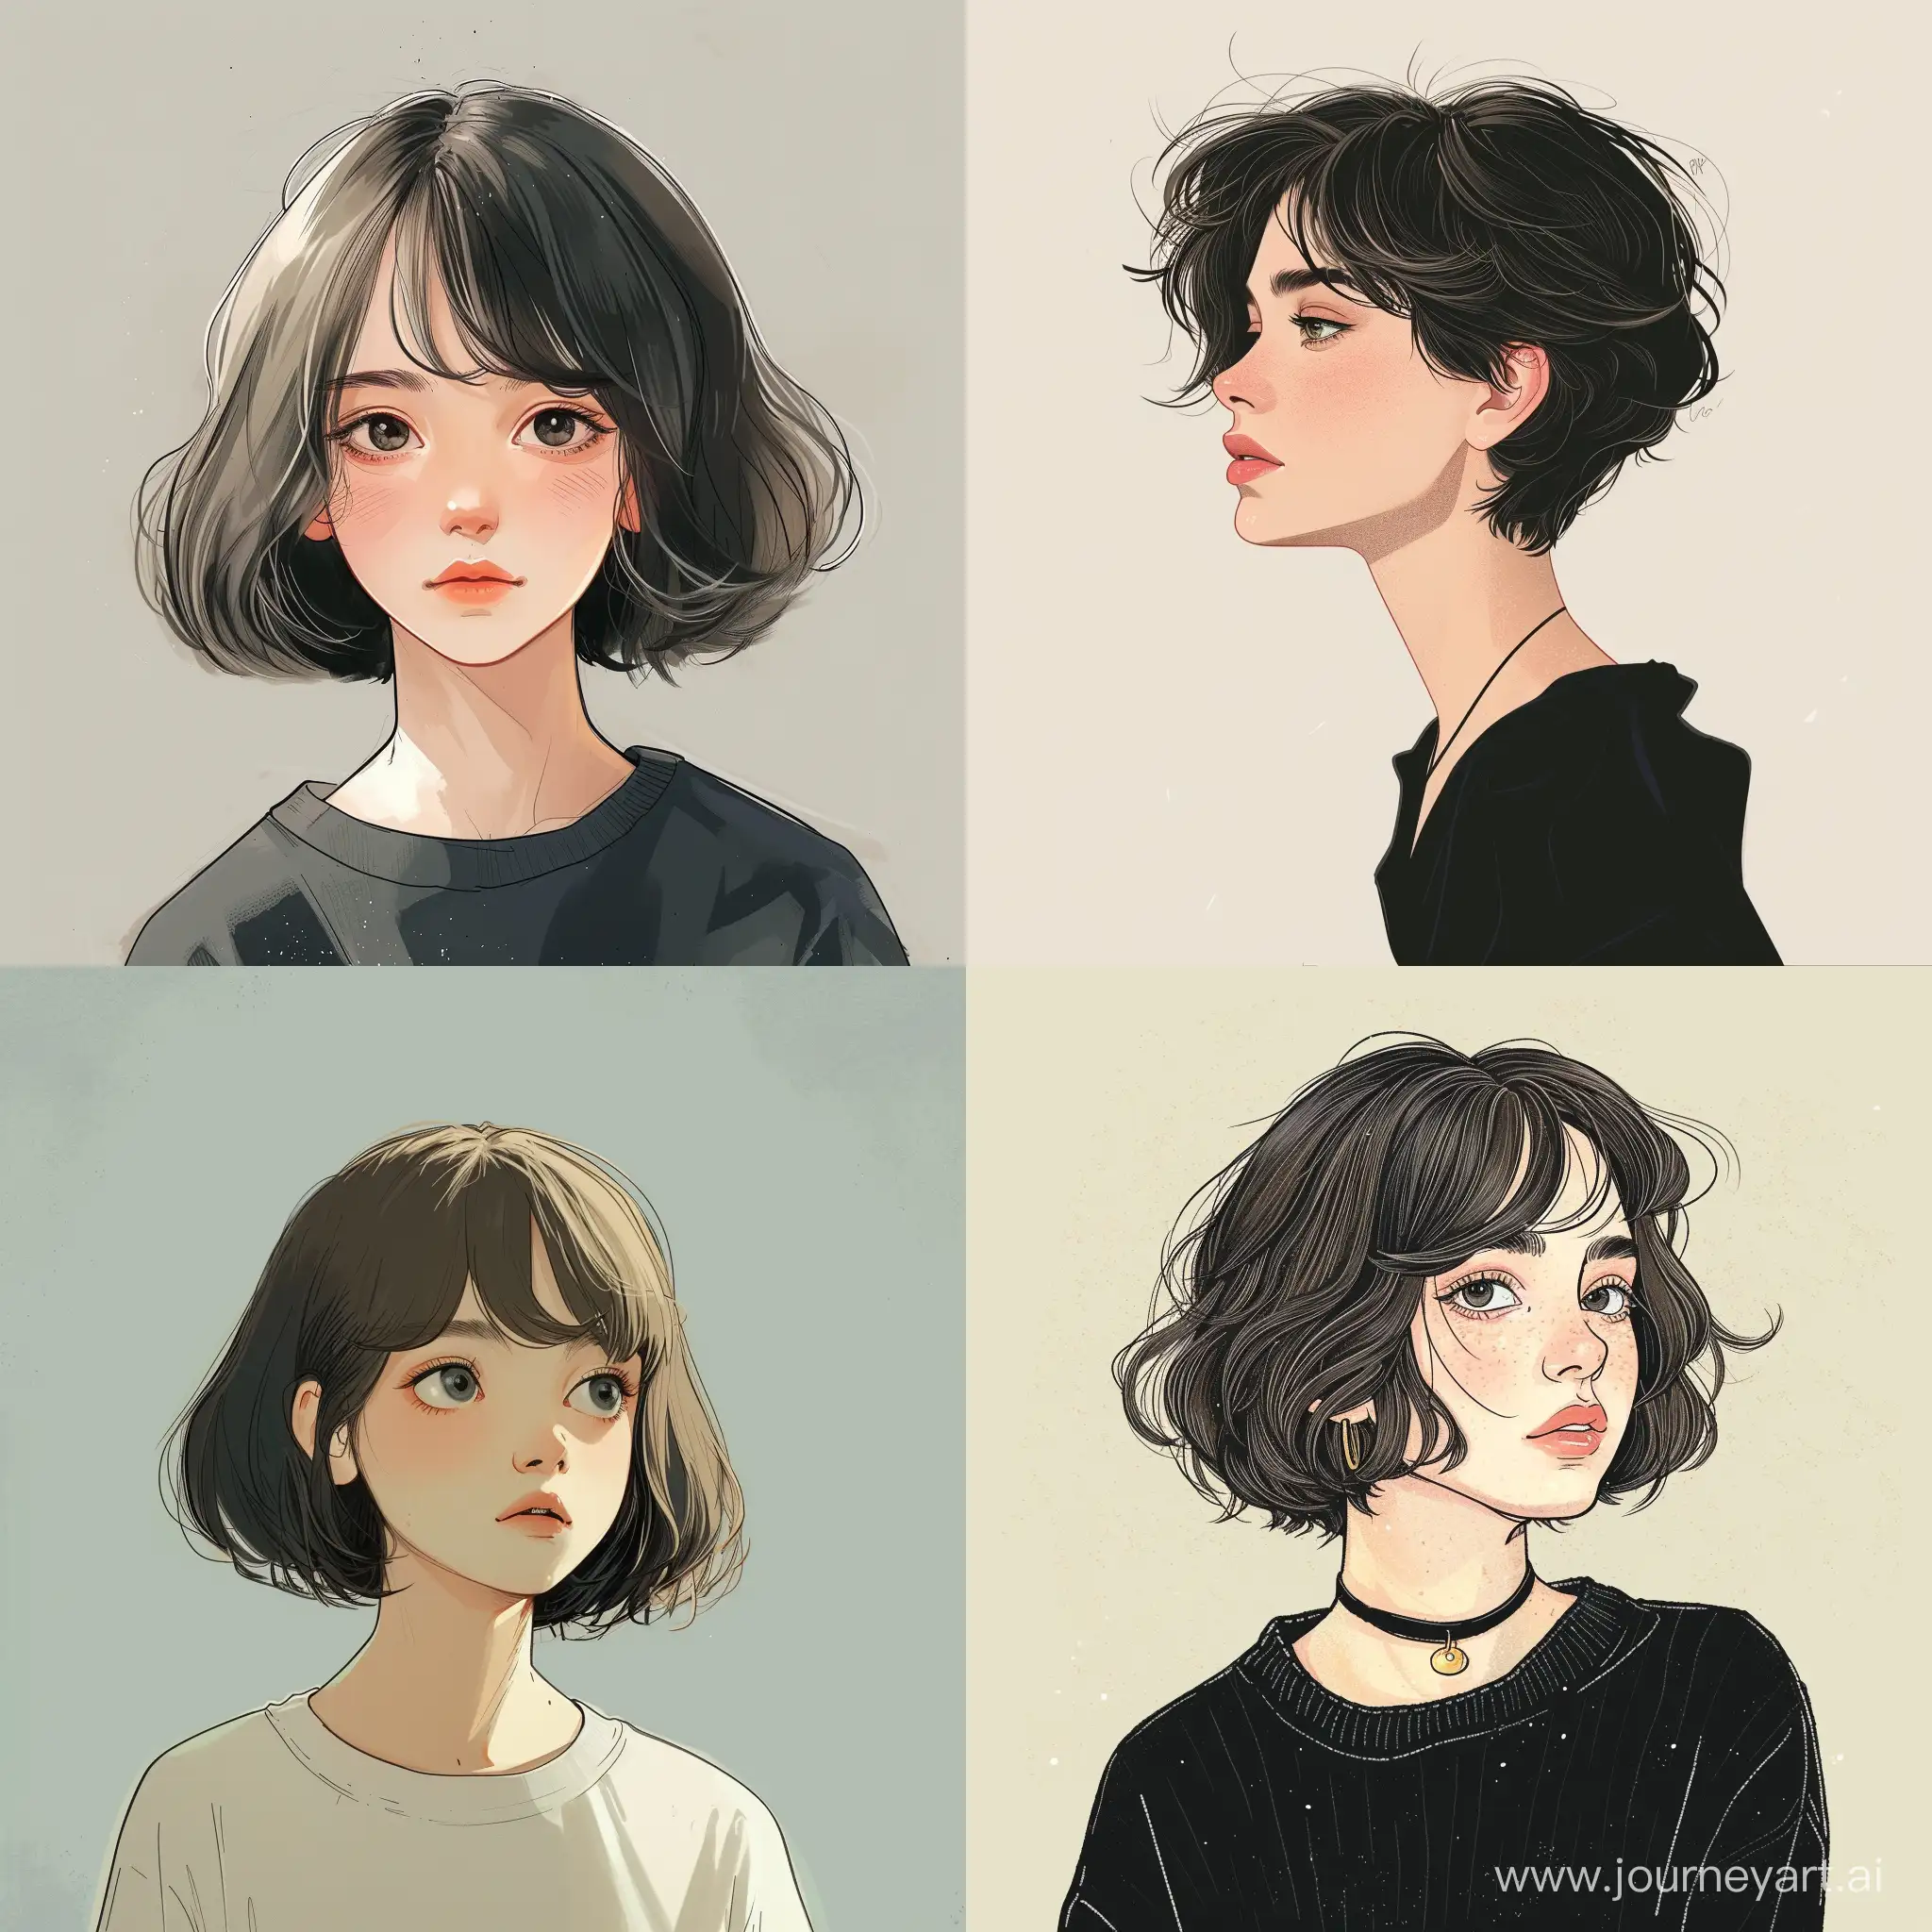 an illustration of short hair 26 years old girl